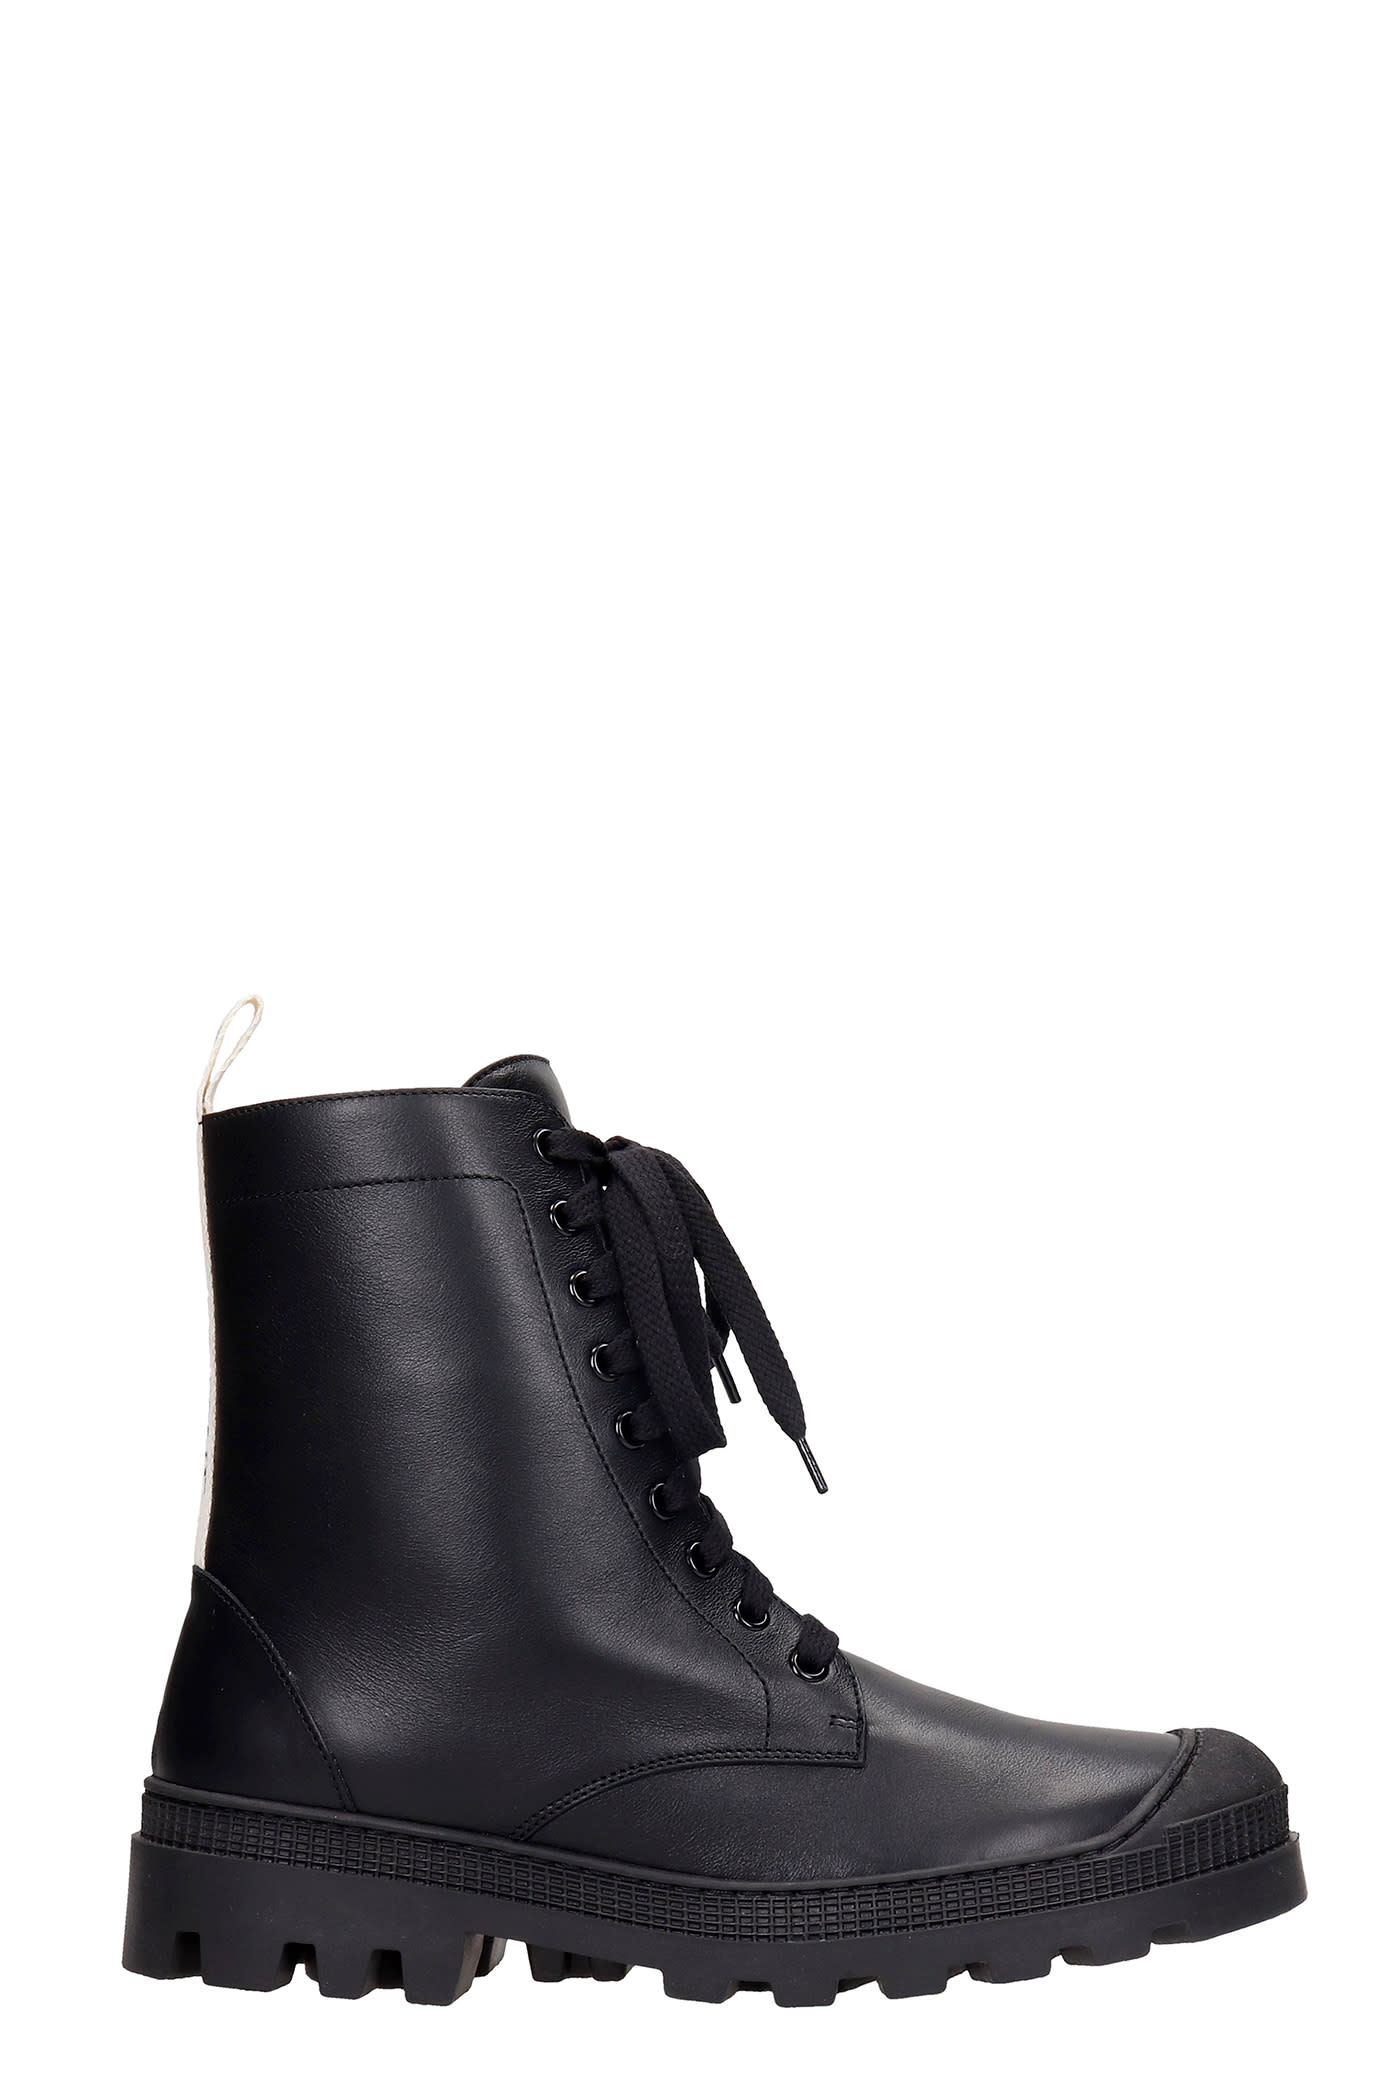 Loewe Combat Boots In Black Leather